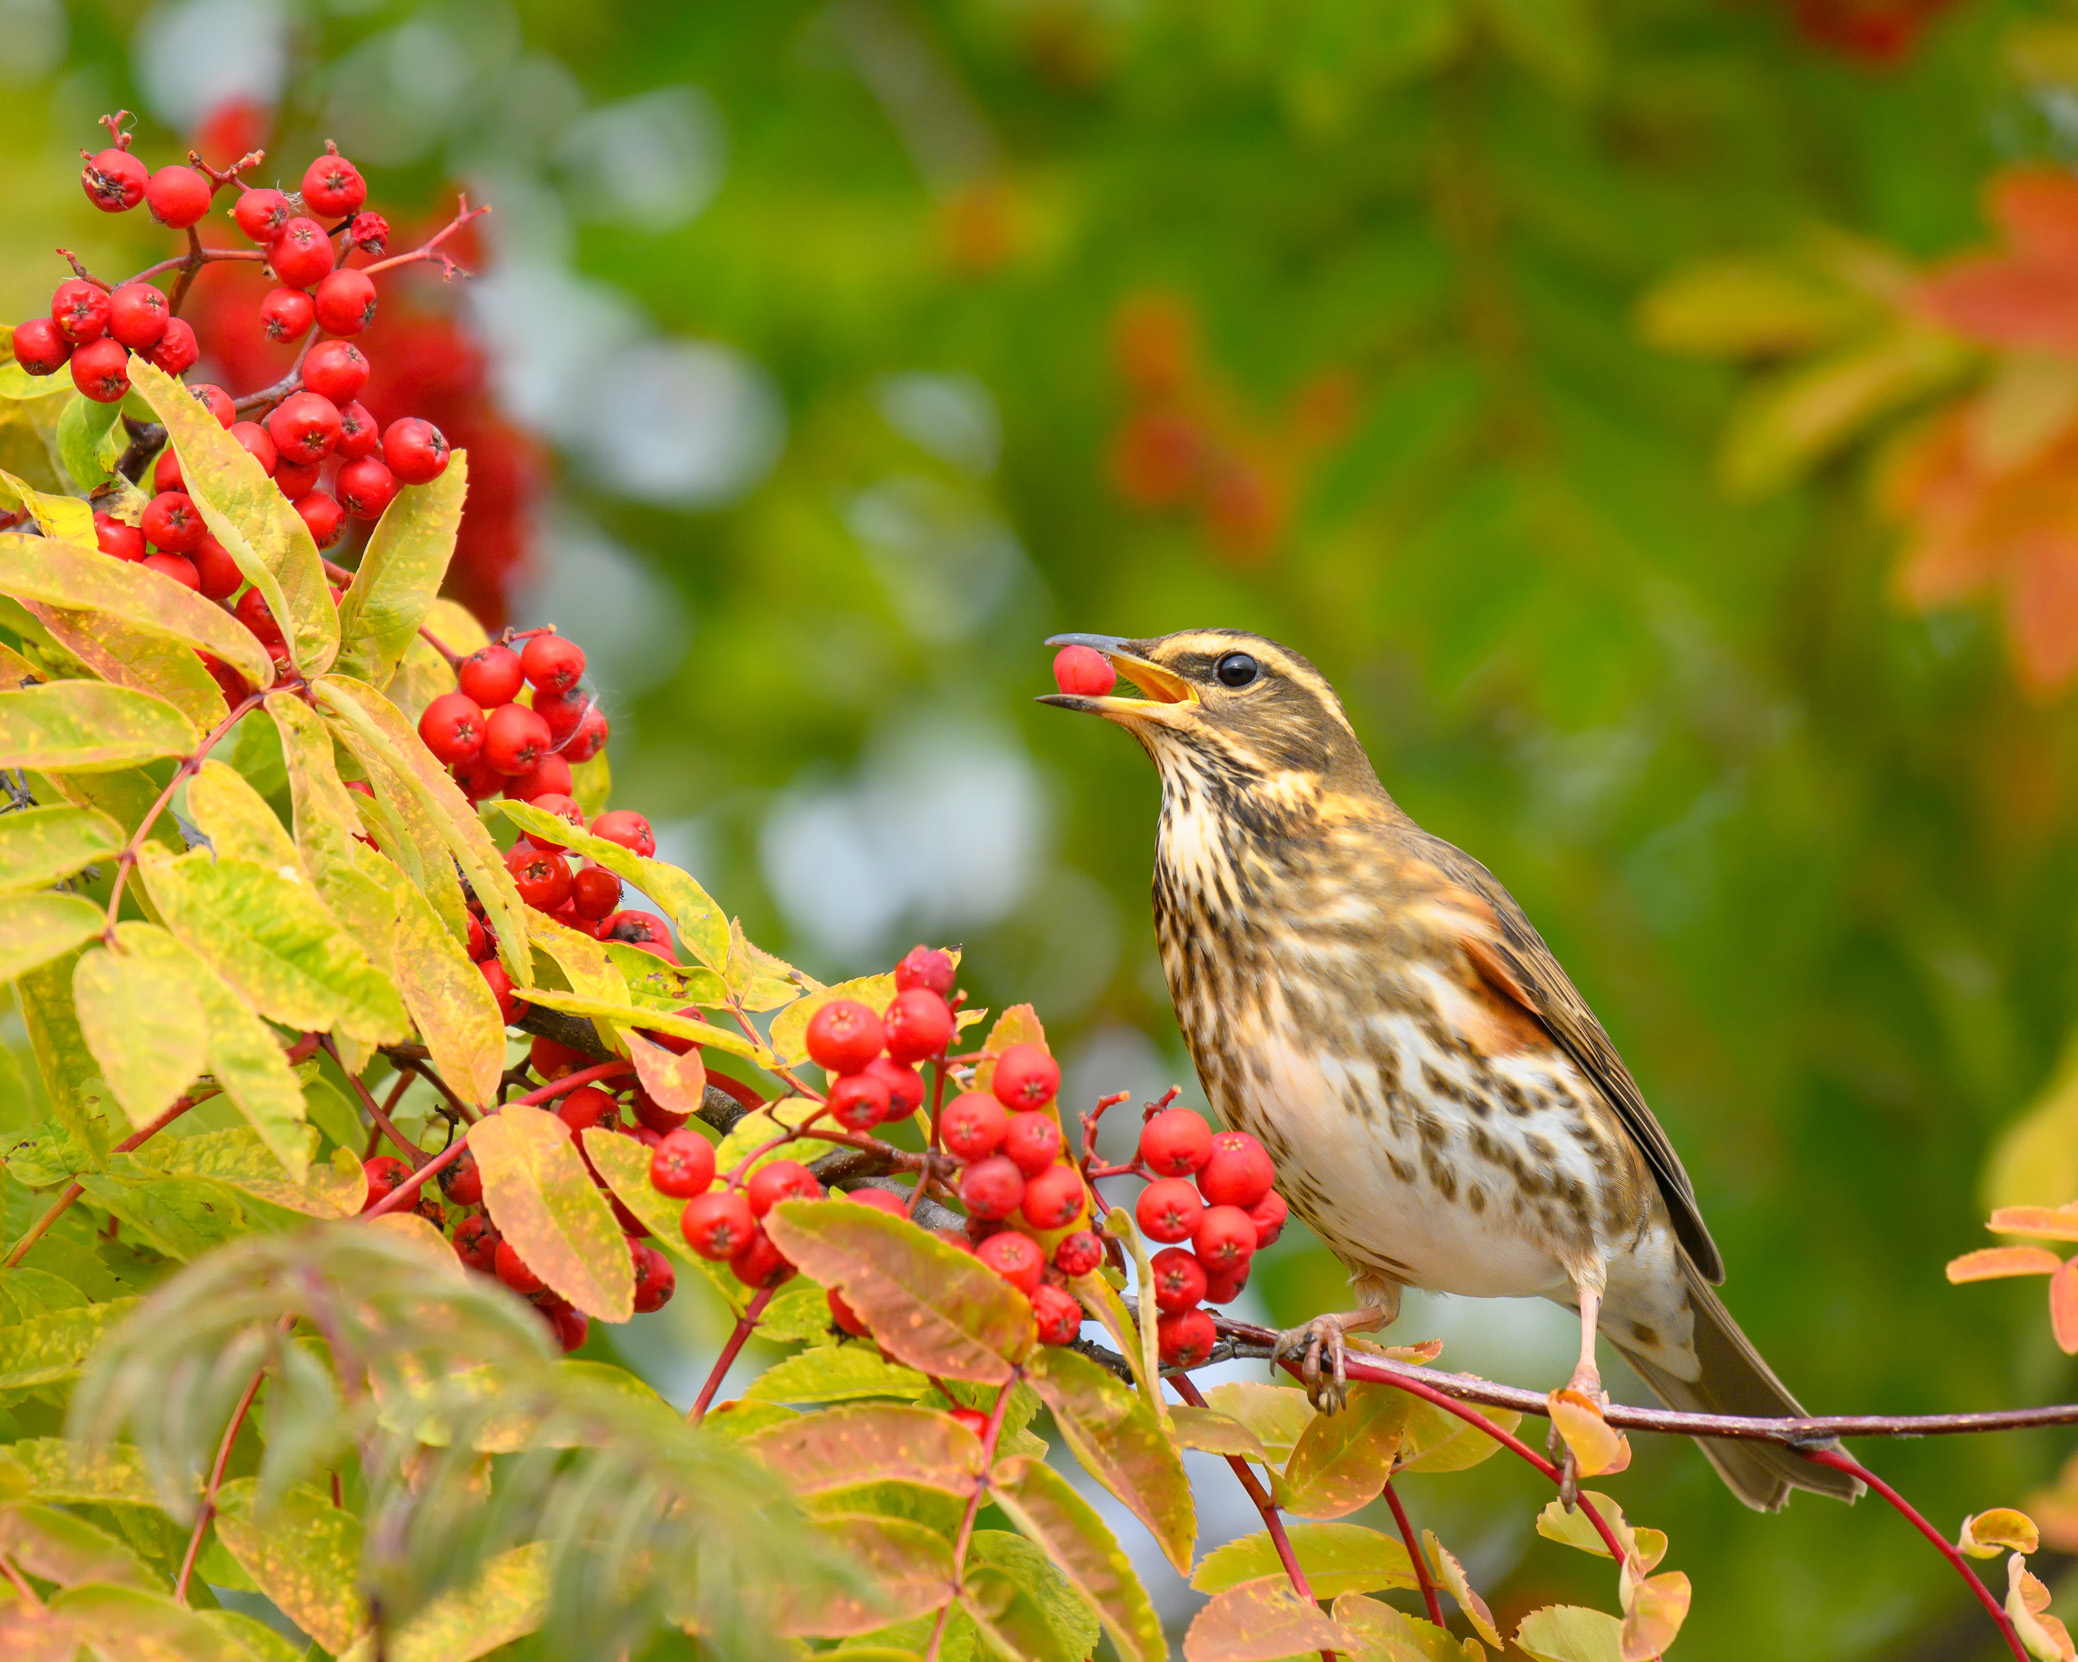 A lone Redwing perched in a tree feeding off surrounding red berries.